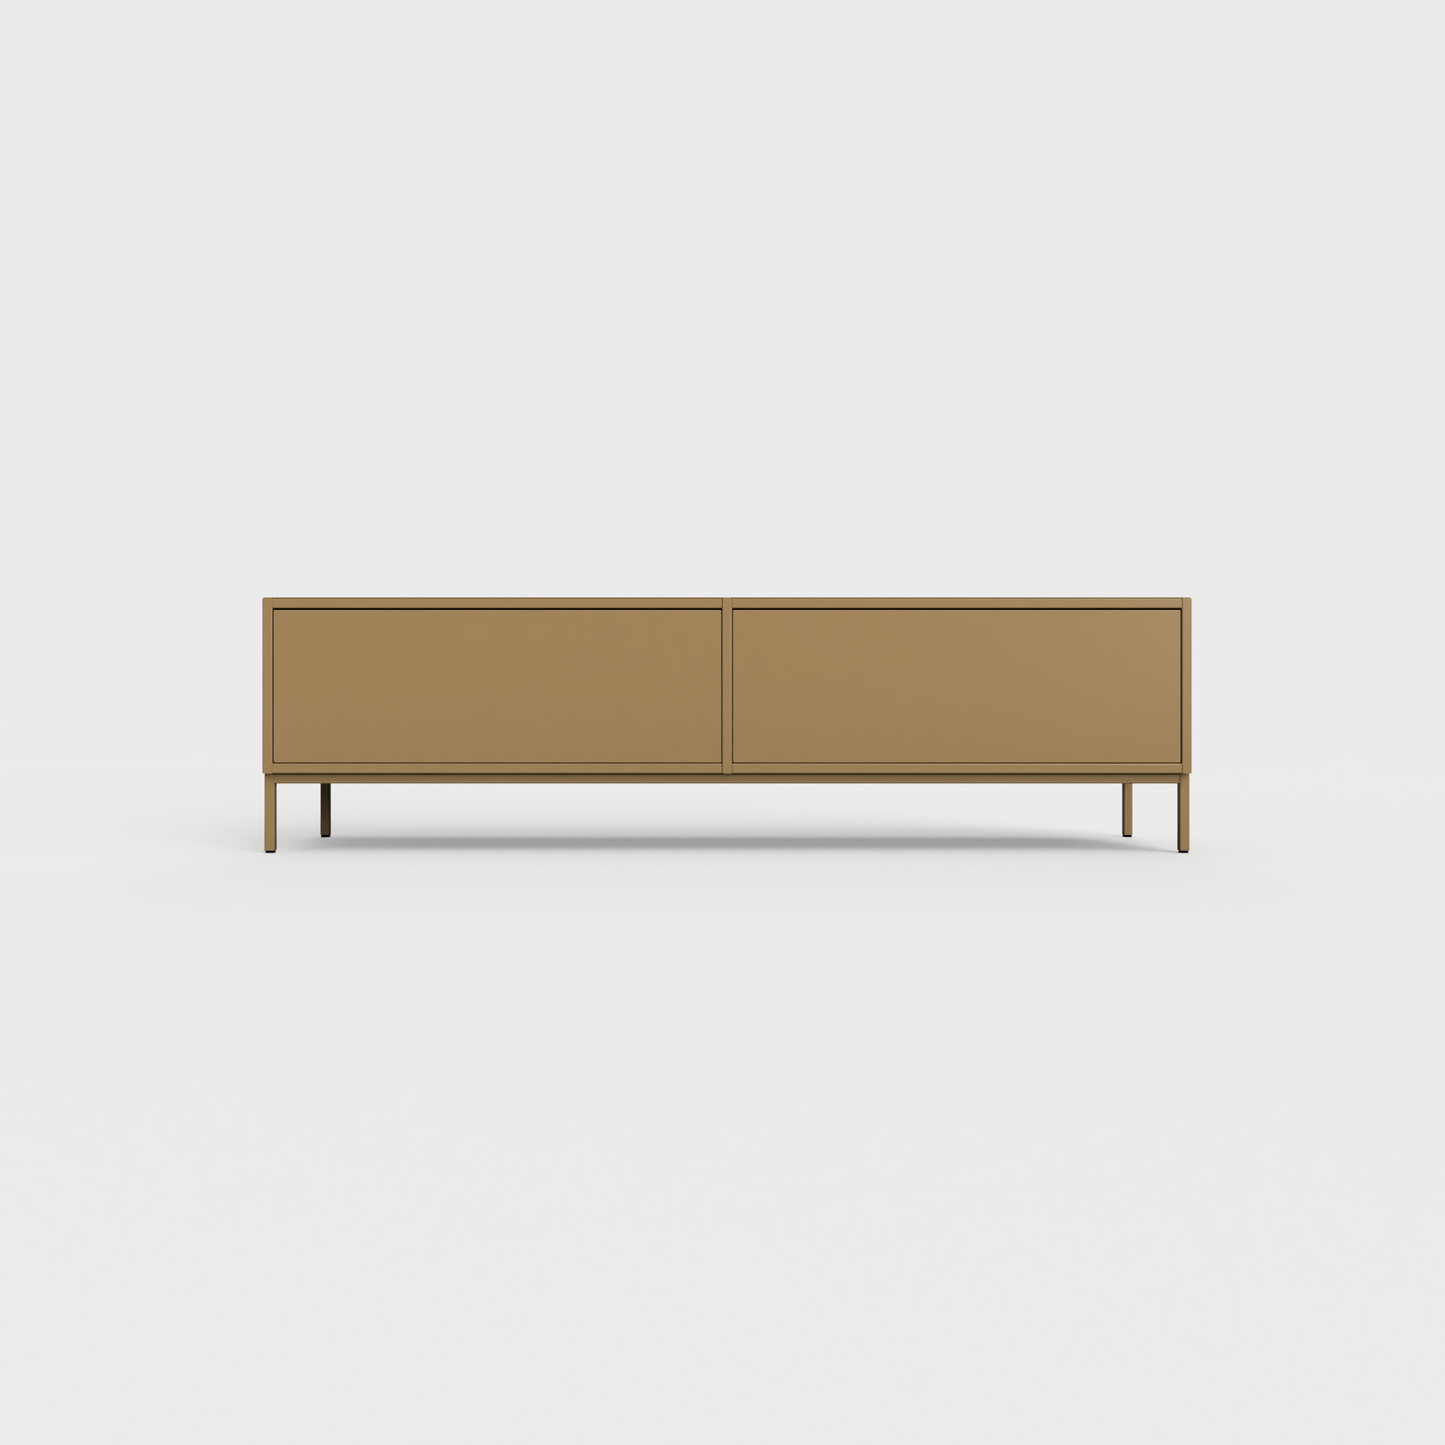 Prunus 01 Lowboard in Desert Palm color, powder-coated steel, elegant and modern piece of furniture for your living room